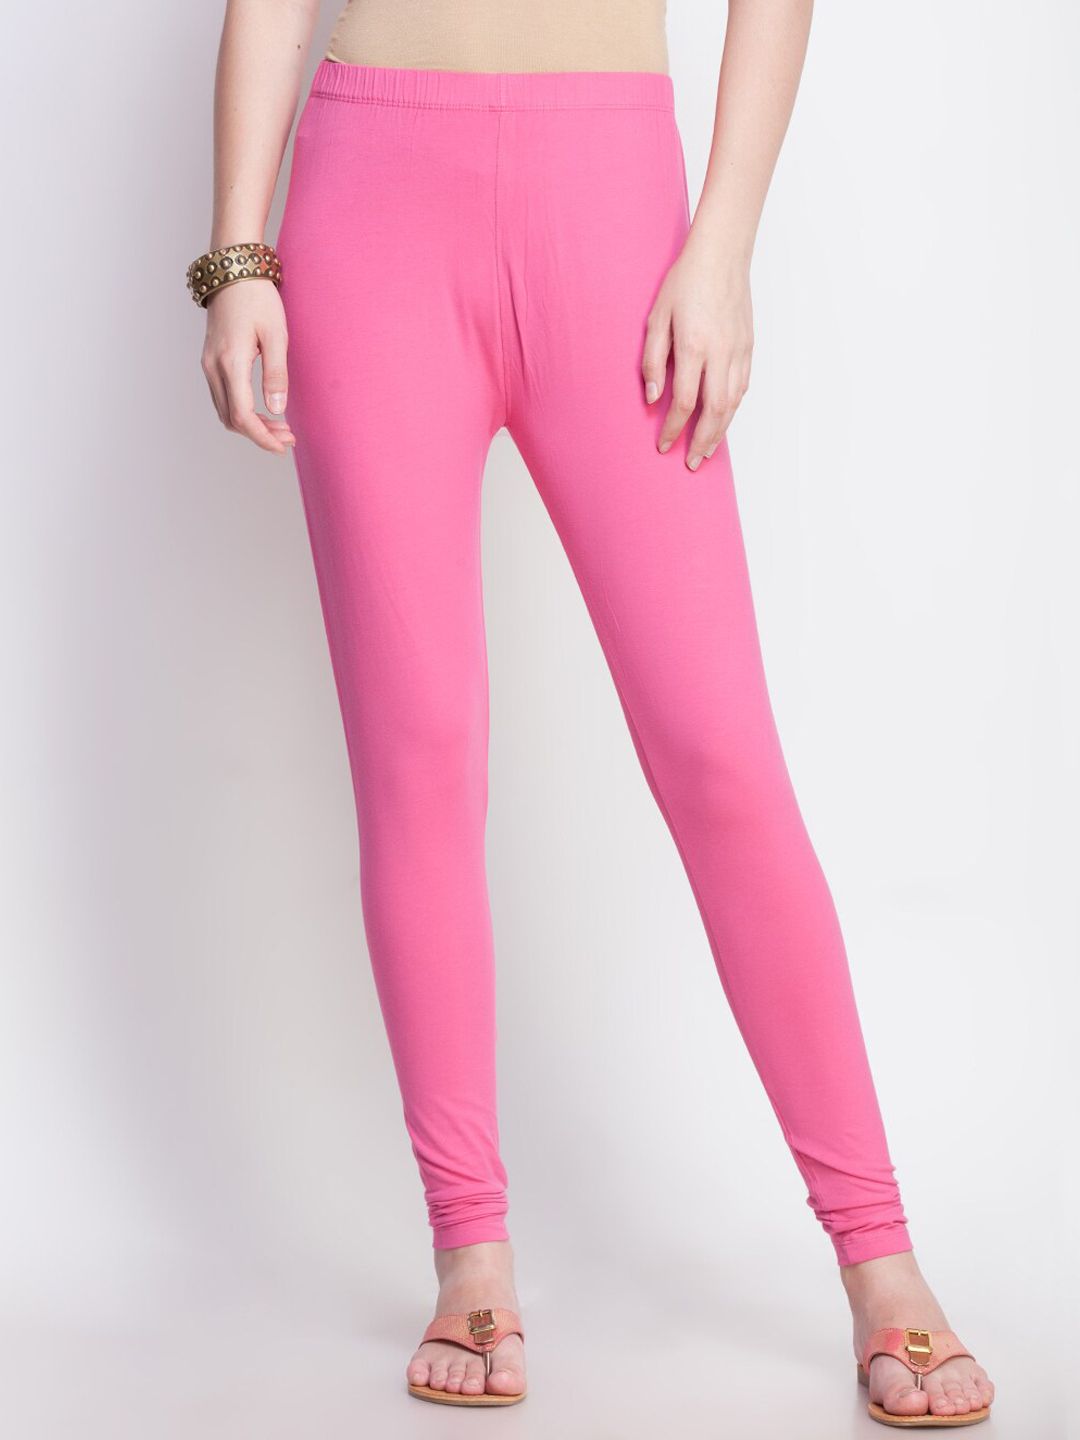 Dollar Missy Women Pink Solid Cotton Slim-Fit Ankle-Length Leggings Price in India